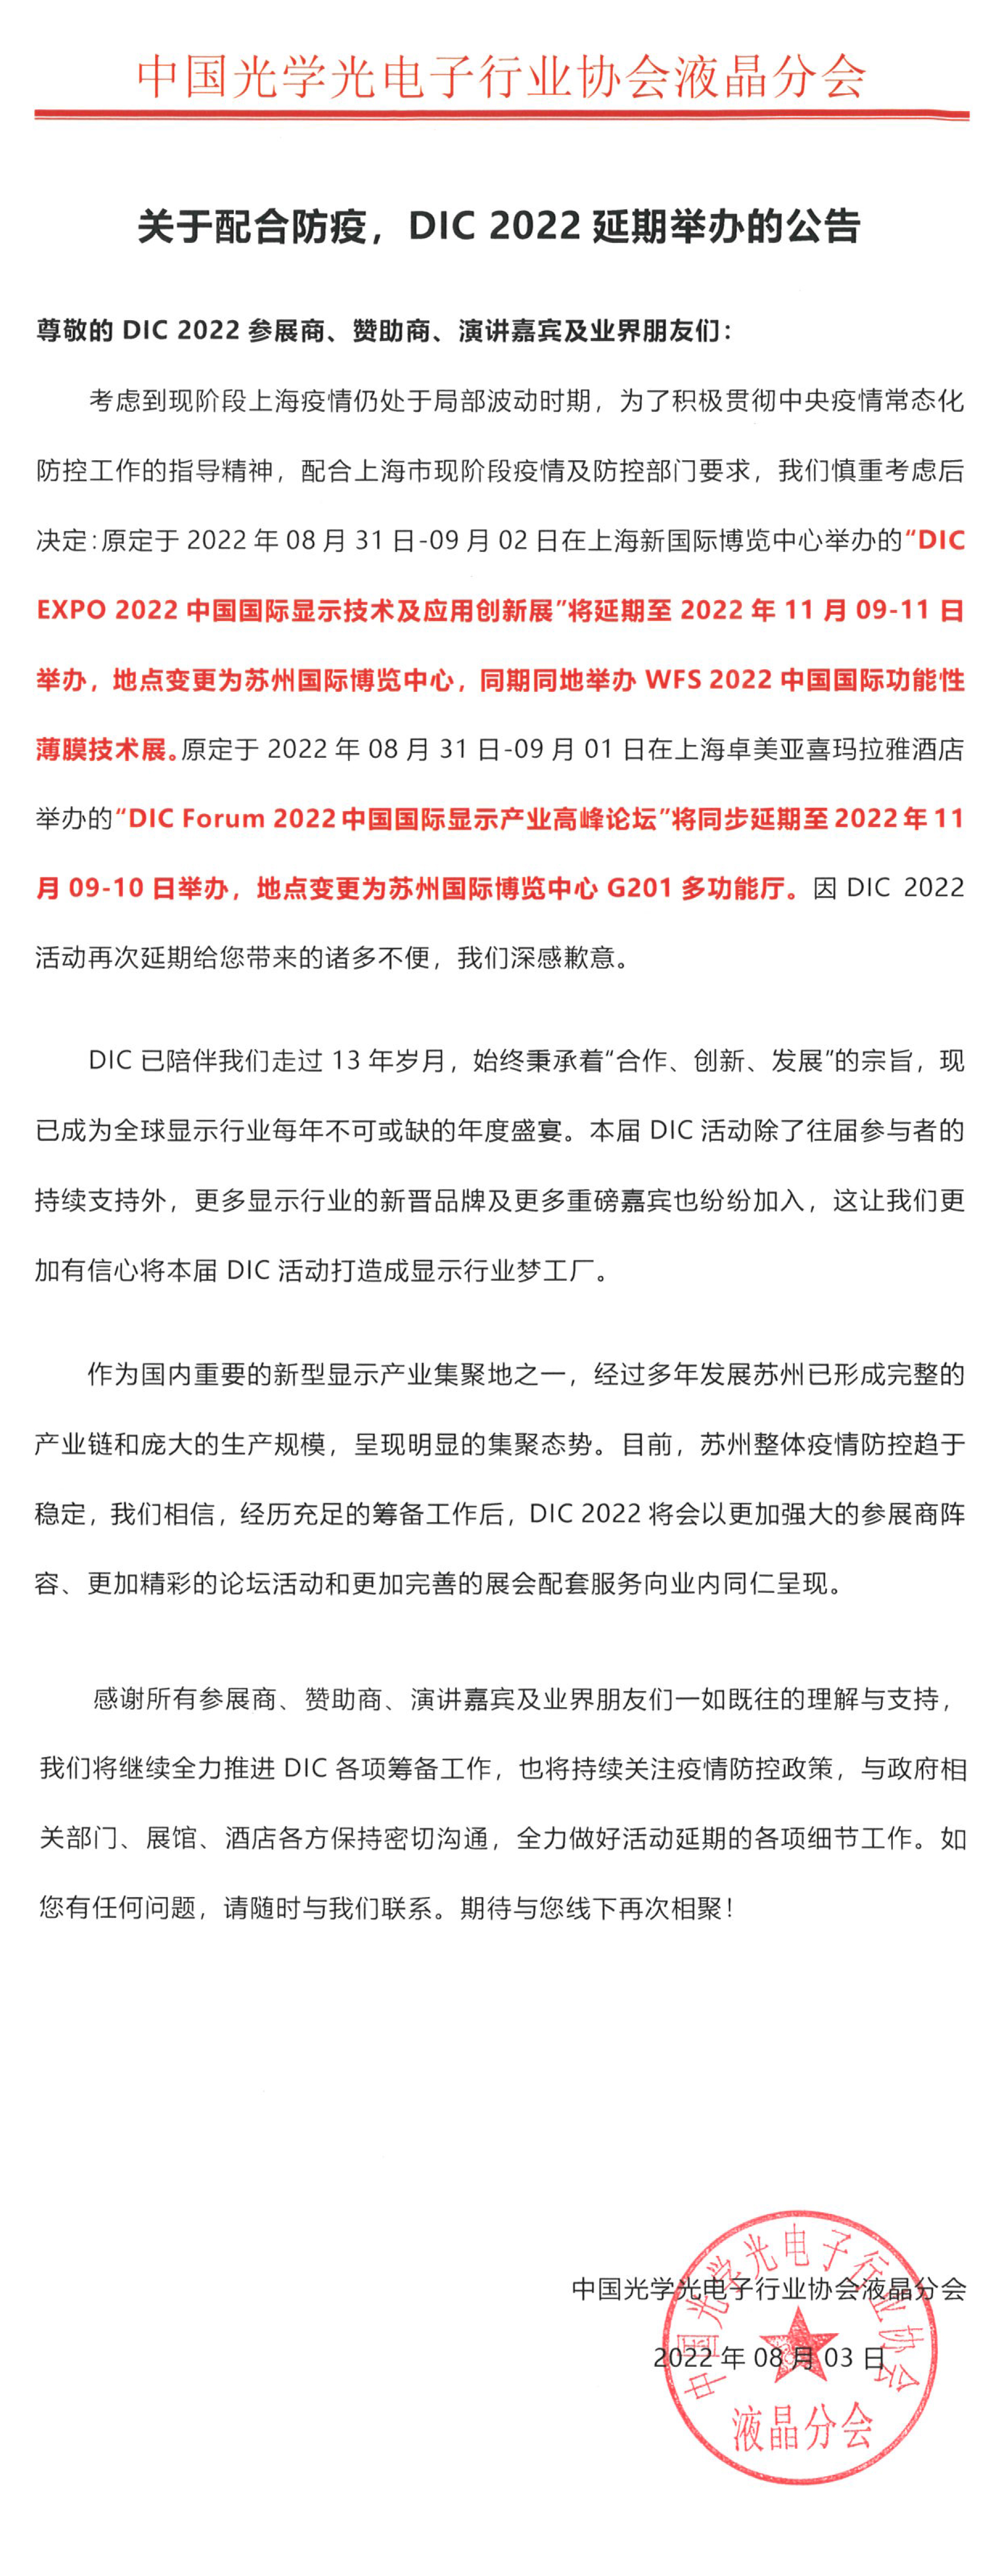 The extension announcement - DIC 2022 will be held in Suzhou from November 9 to 